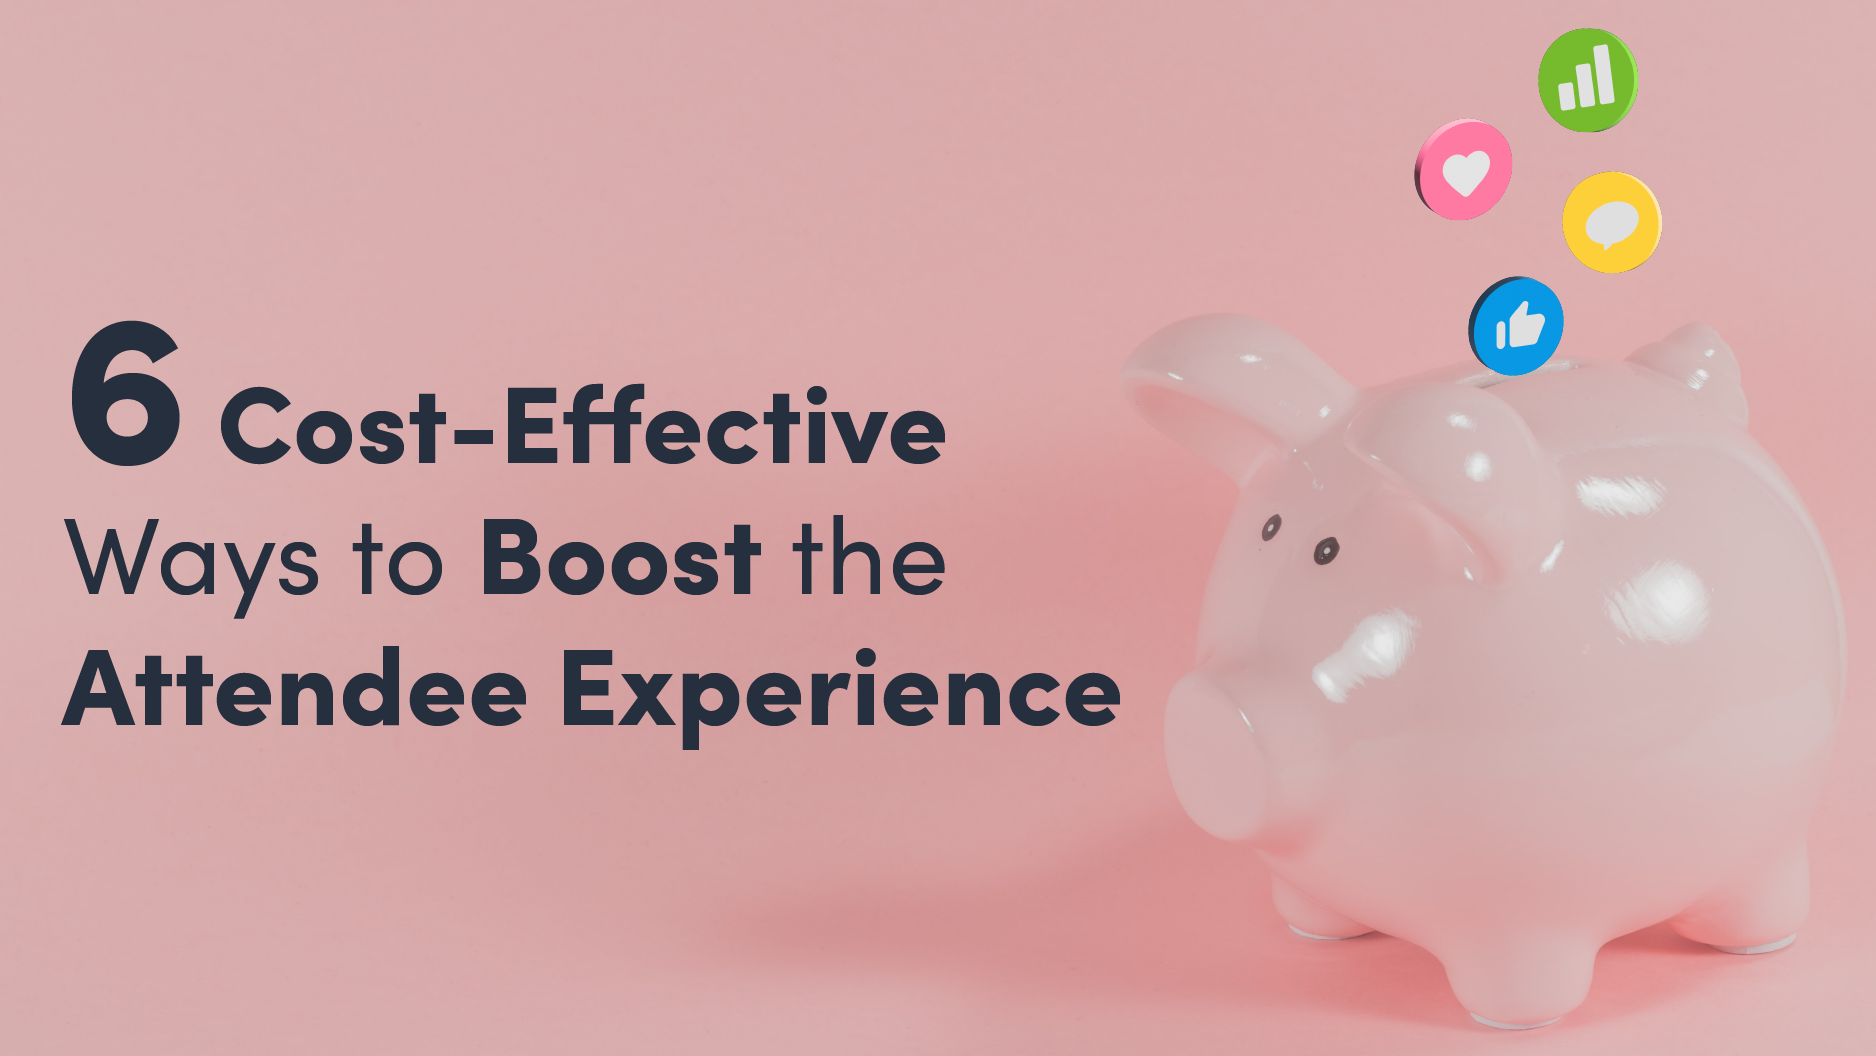 6 Budget-Friendly Ways to Boost Virtual & Onsite Attendee Experiences